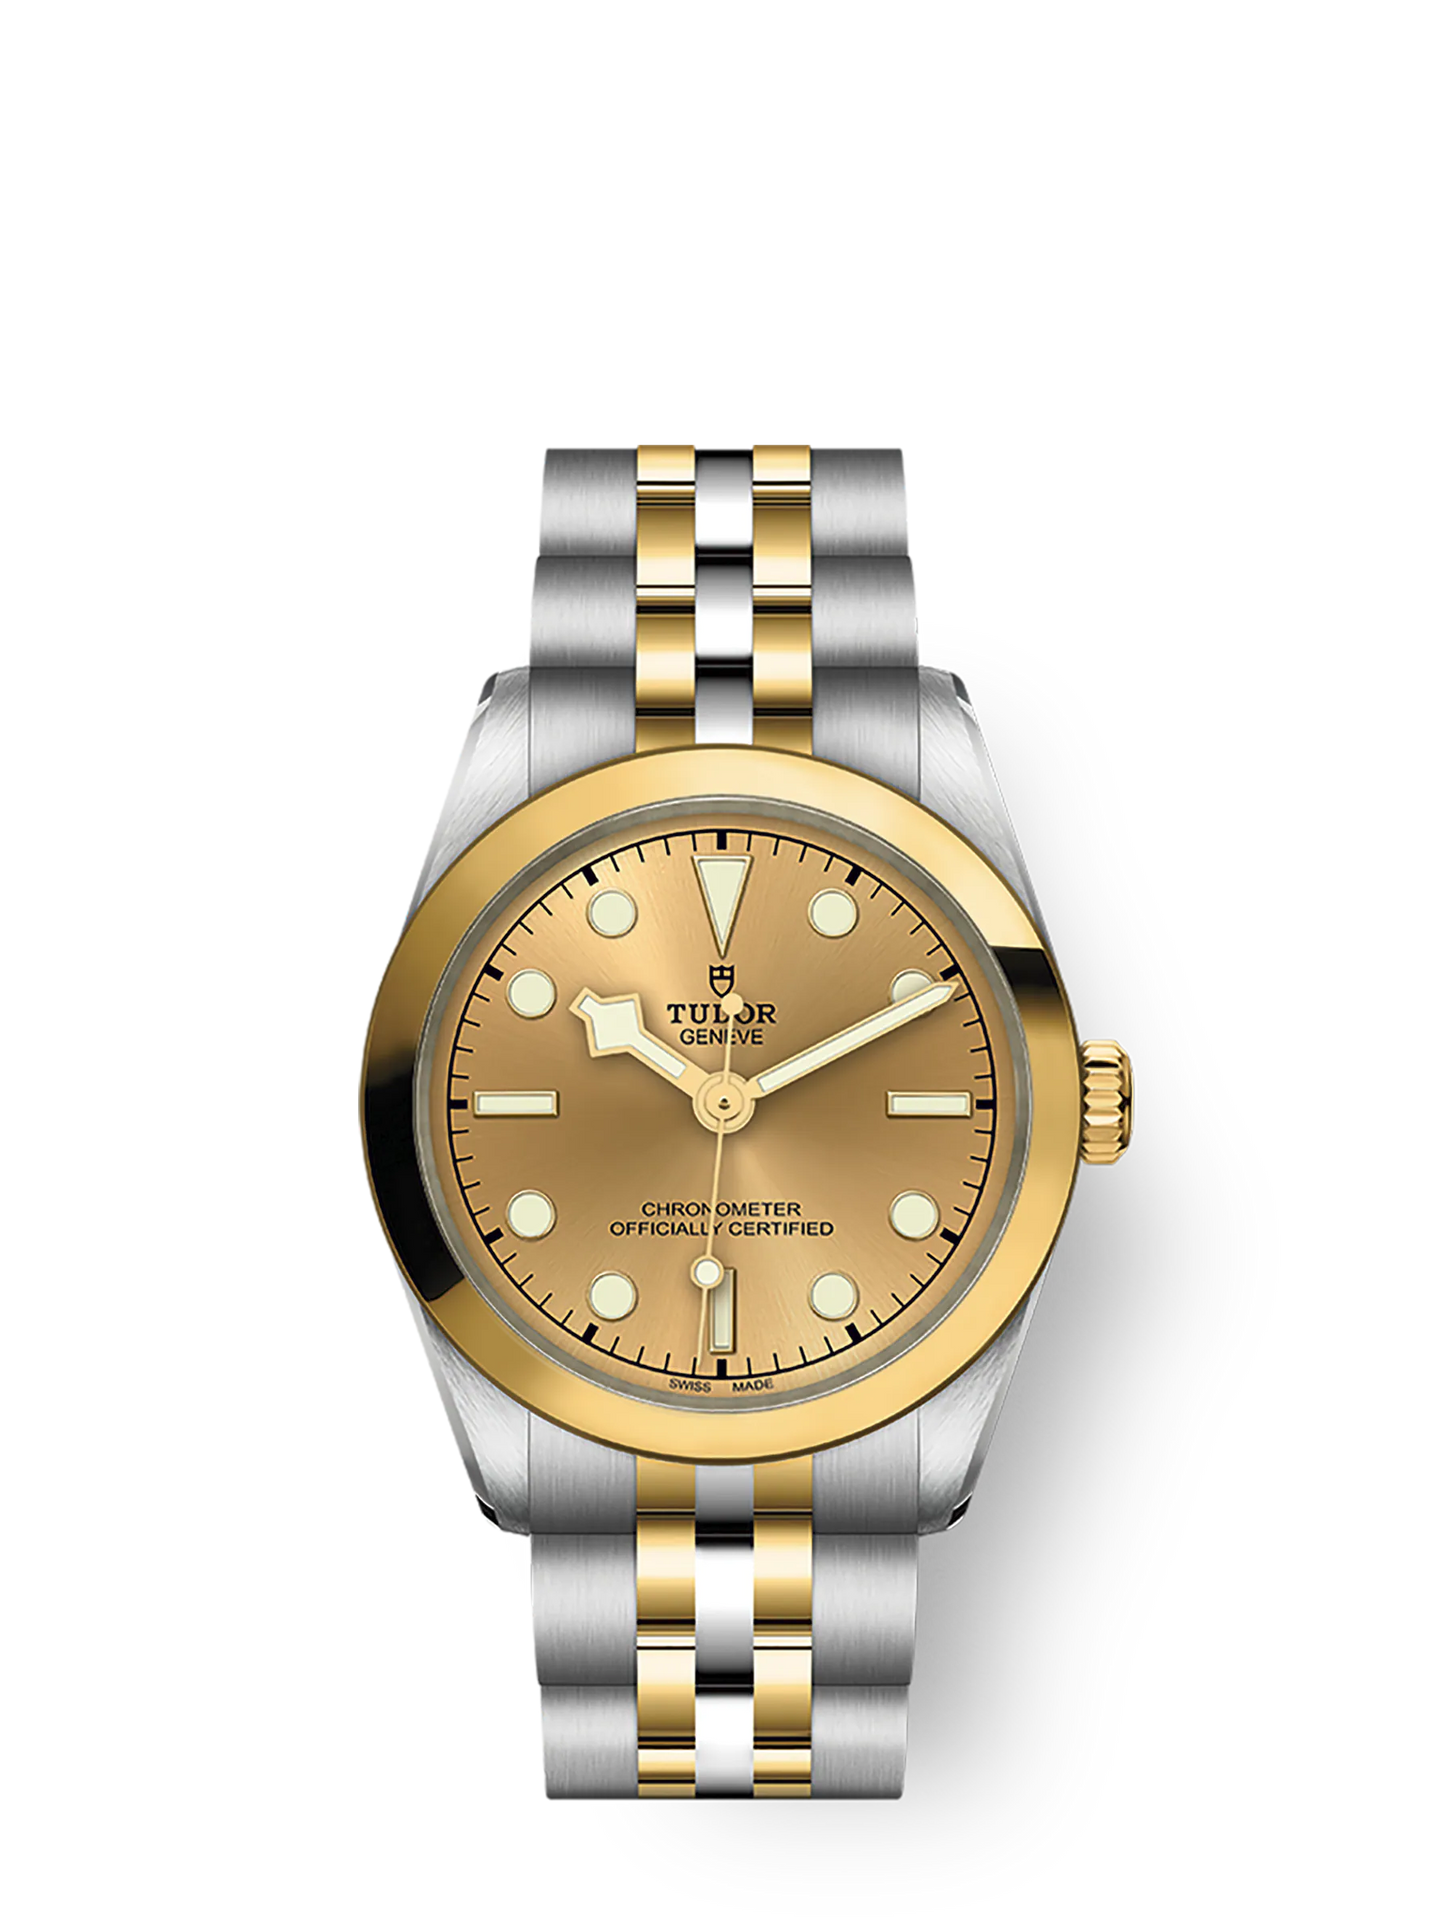 Tudor Black Bay 31 S&G, 316L Stainless Steel and 18k Yellow Gold, Ref# M79603-0005